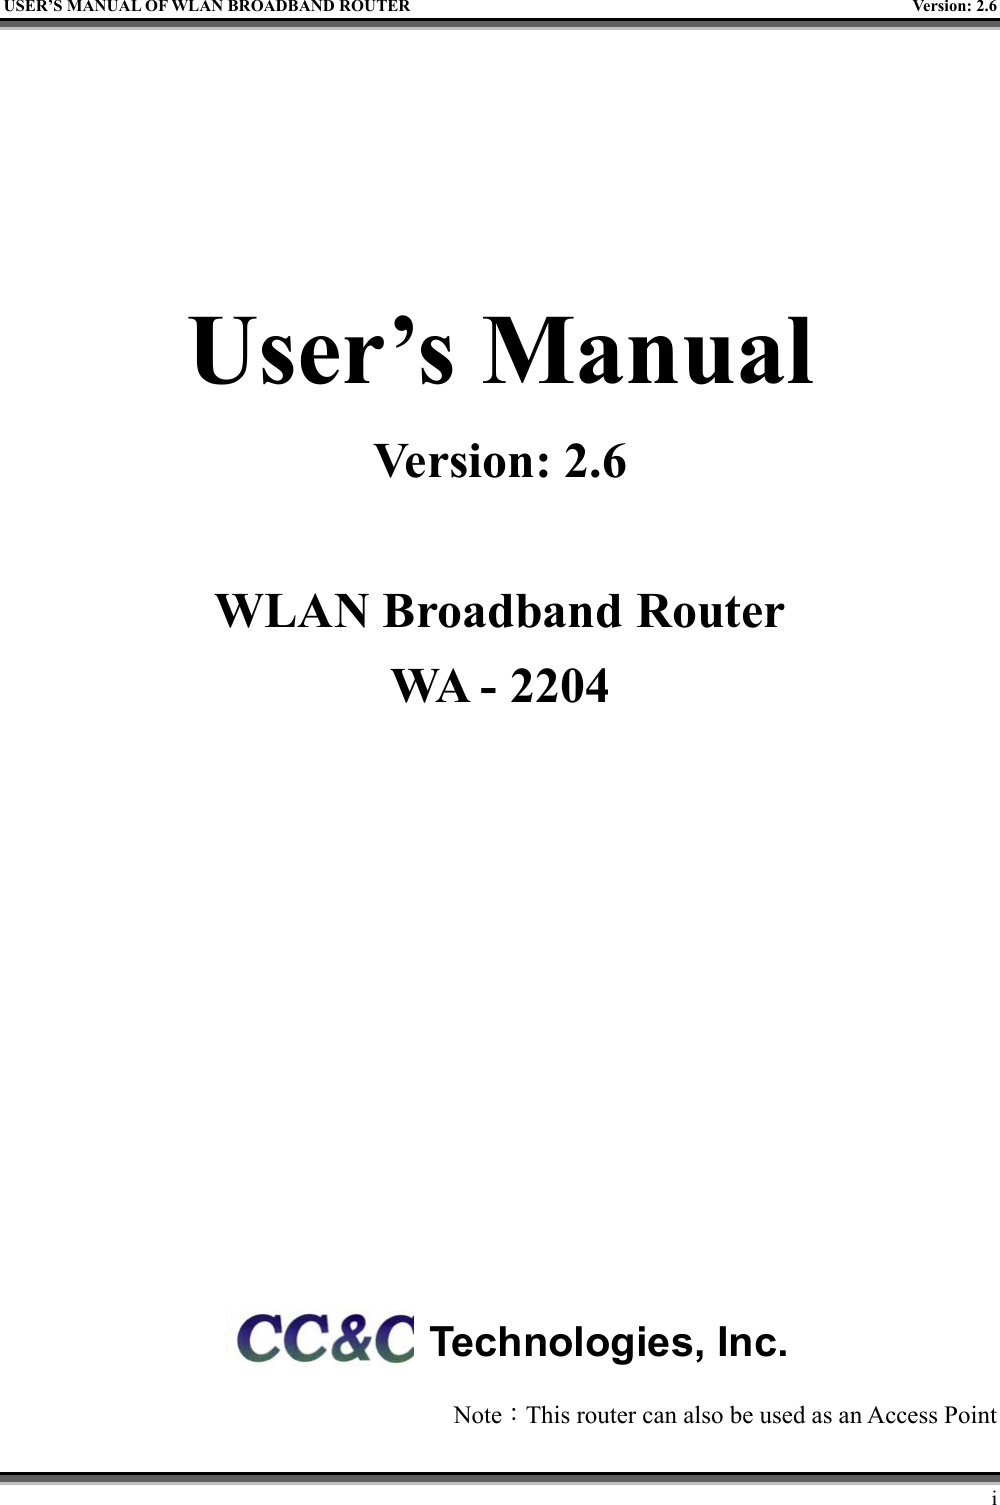   USER’S MANUAL OF WLAN BROADBAND ROUTER    Version: 2.6     i    User’s Manual Version: 2.6  WLAN Broadband Router WA - 2204          Note：This router can also be used as an Access Point Technologies, Inc. 